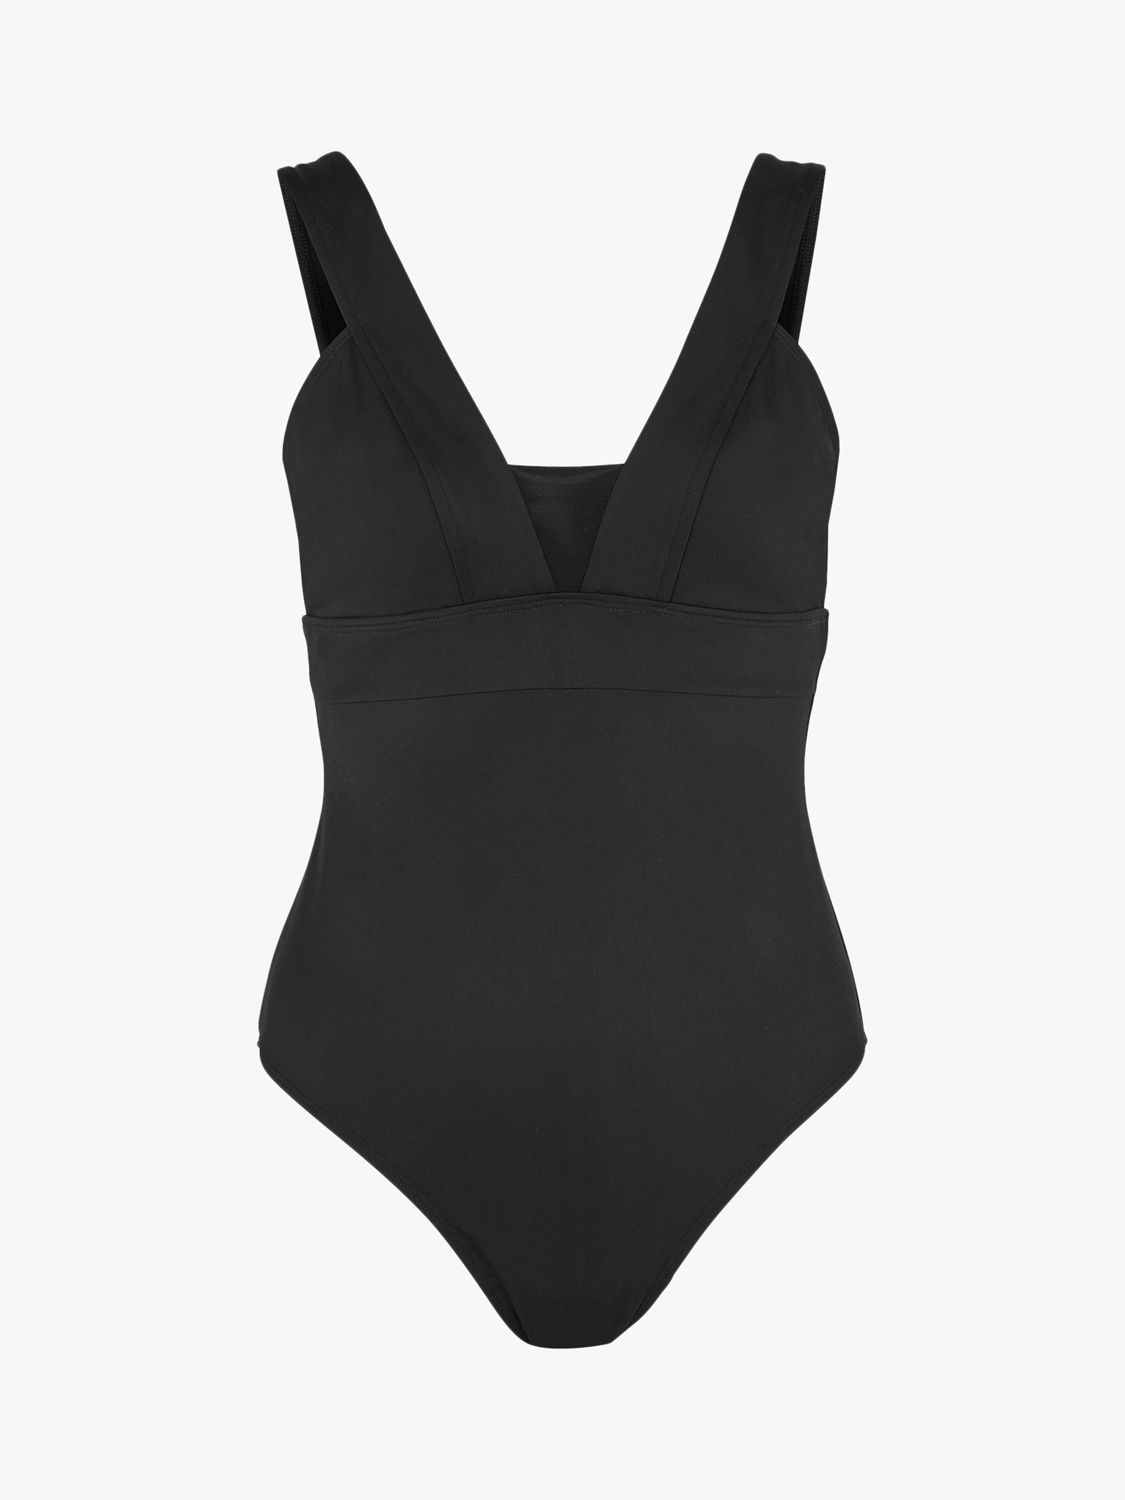 Accessorize Lexi Mesh Shaping Swimsuit, Black, 6